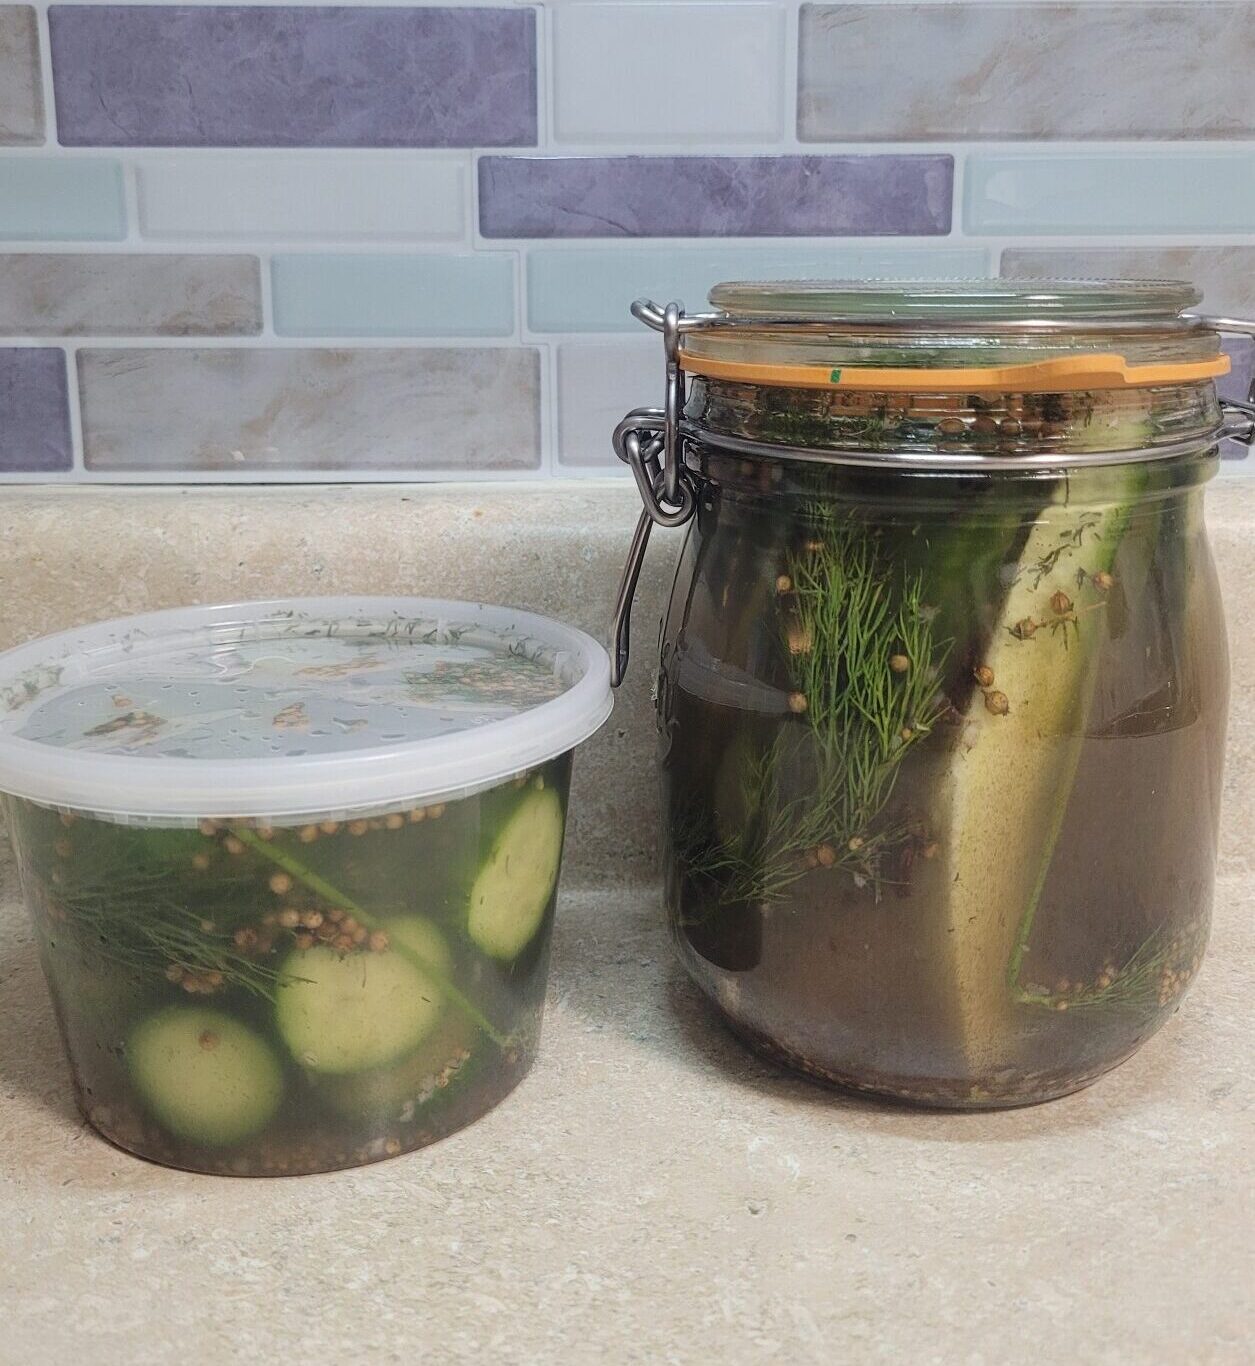 Pickles in the Refrigerator – No Canning, No Sodium, Challenge #9